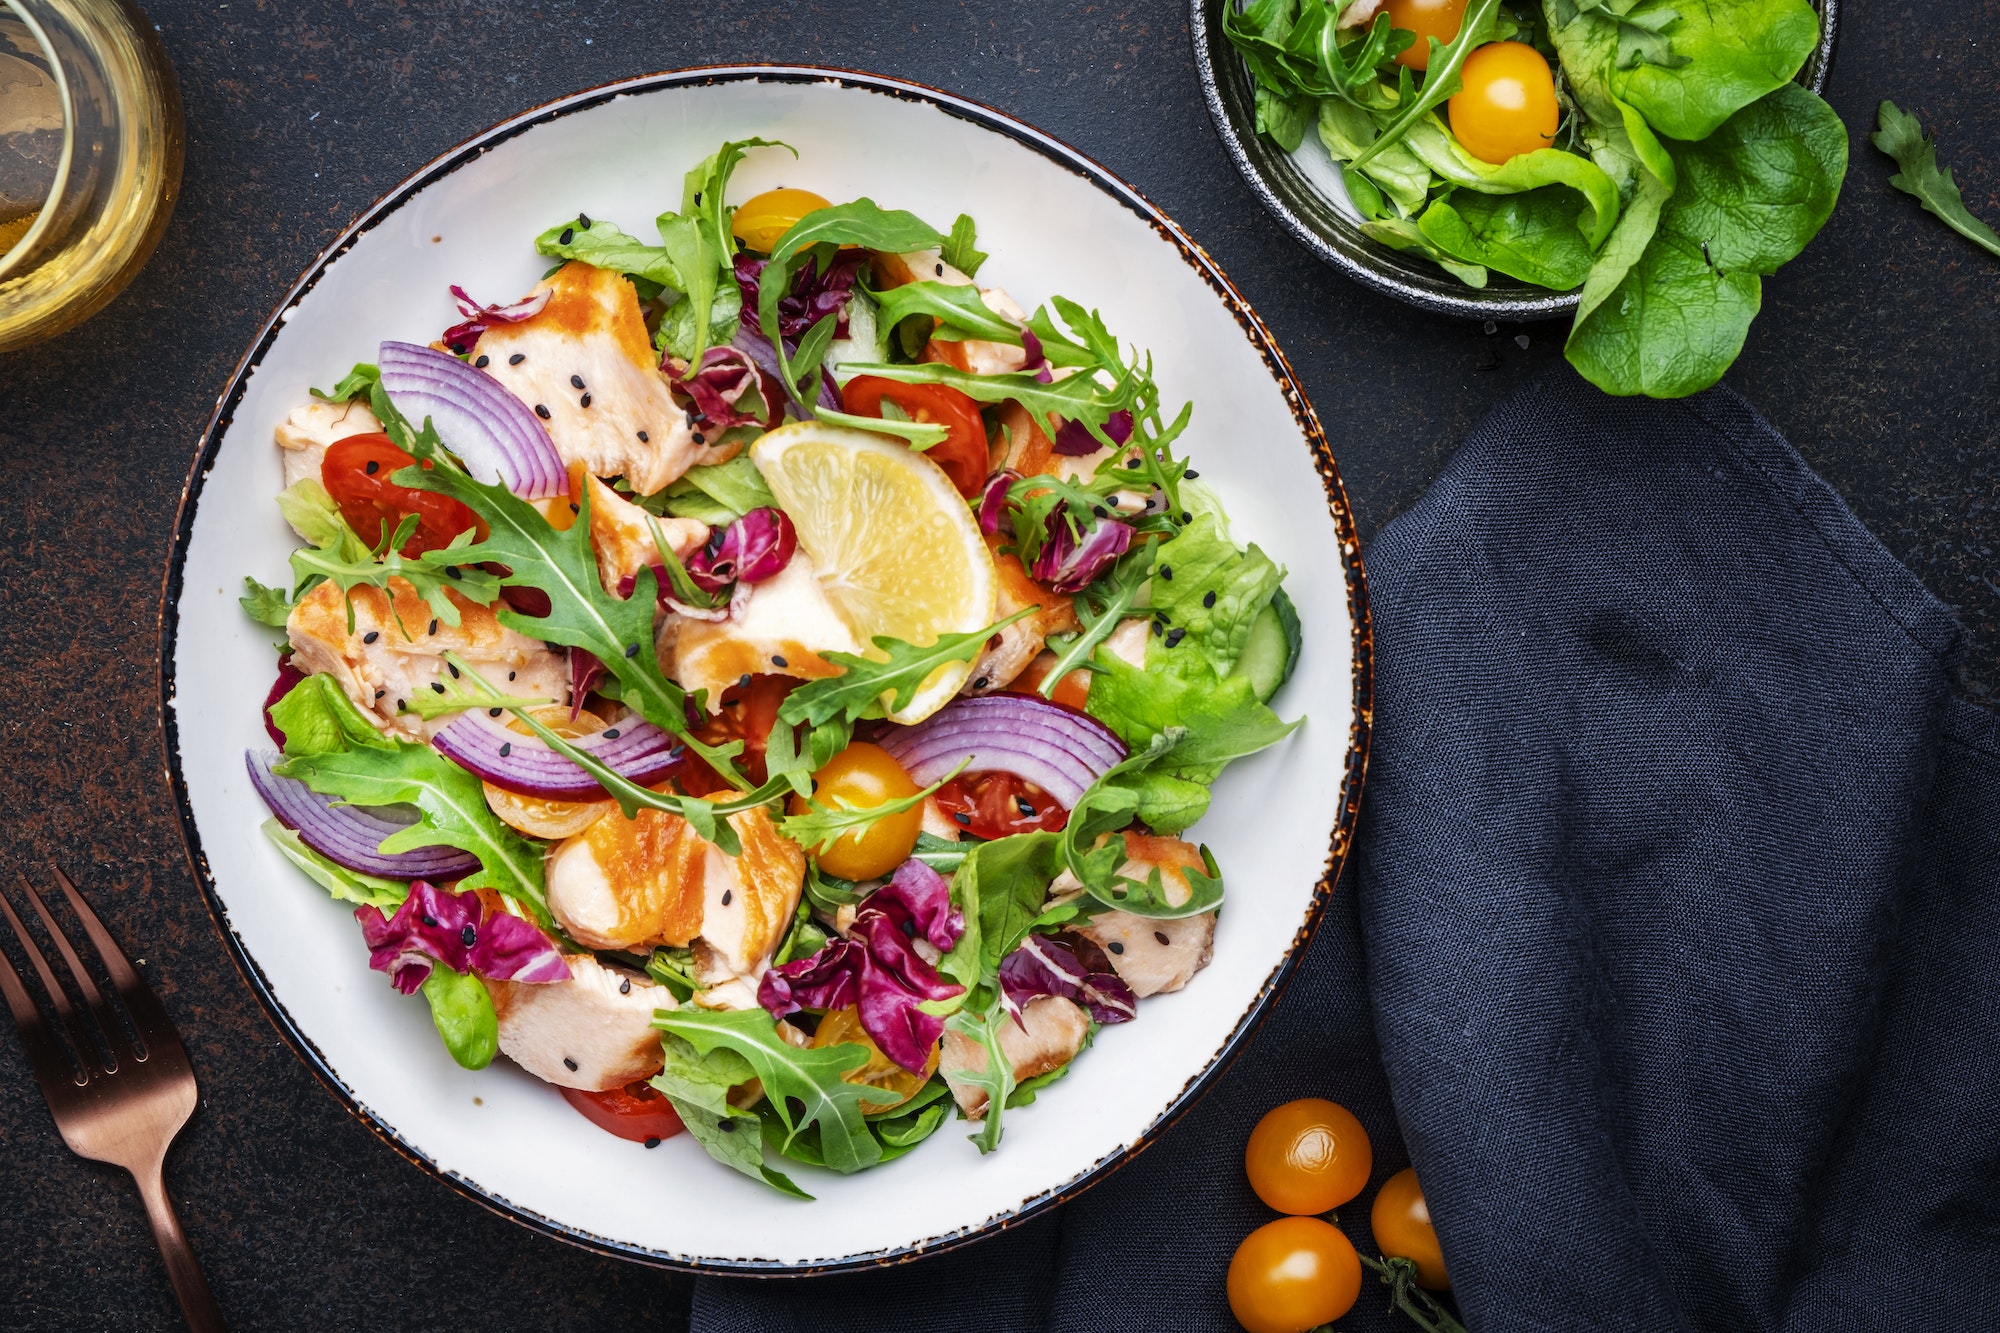 Gourmet salad with grilled salmon with tomatoes, cucumber, arugula, radicchio, red onion and lettuce